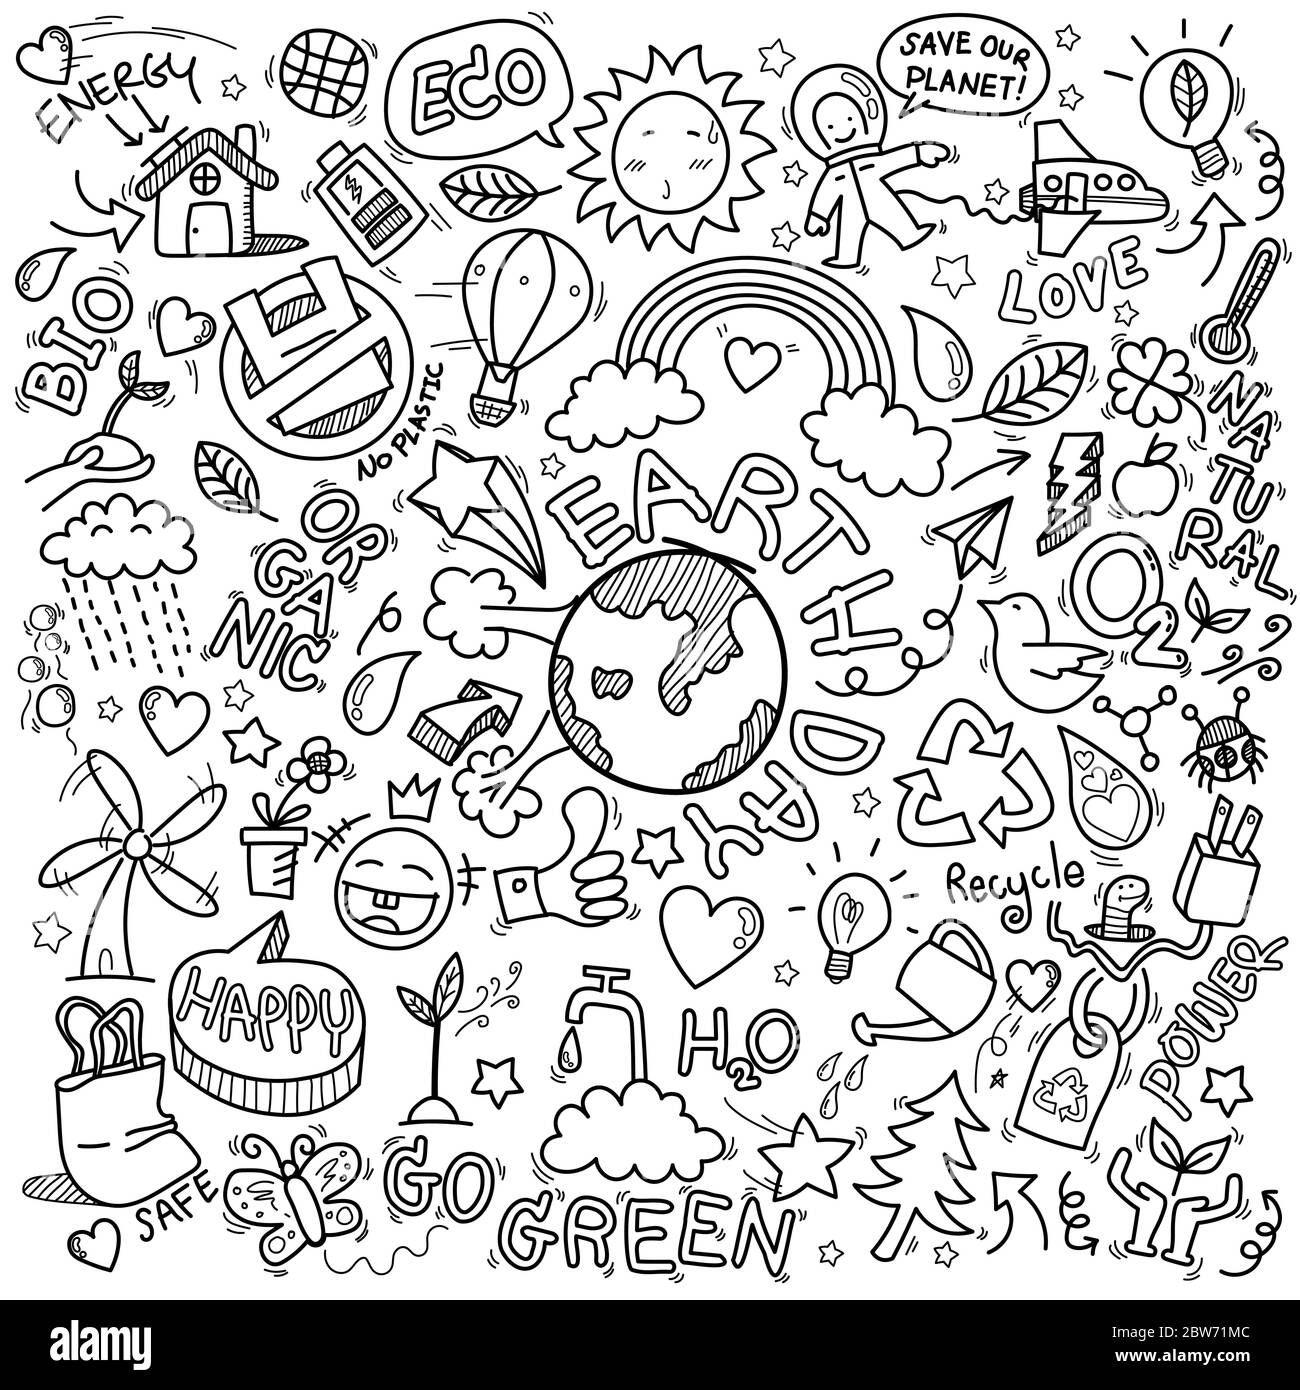 hand drawn of Earth day, Ecology , go green, clean power doodle set isolated on white background, doodles sketch illustration vector Stock Vector